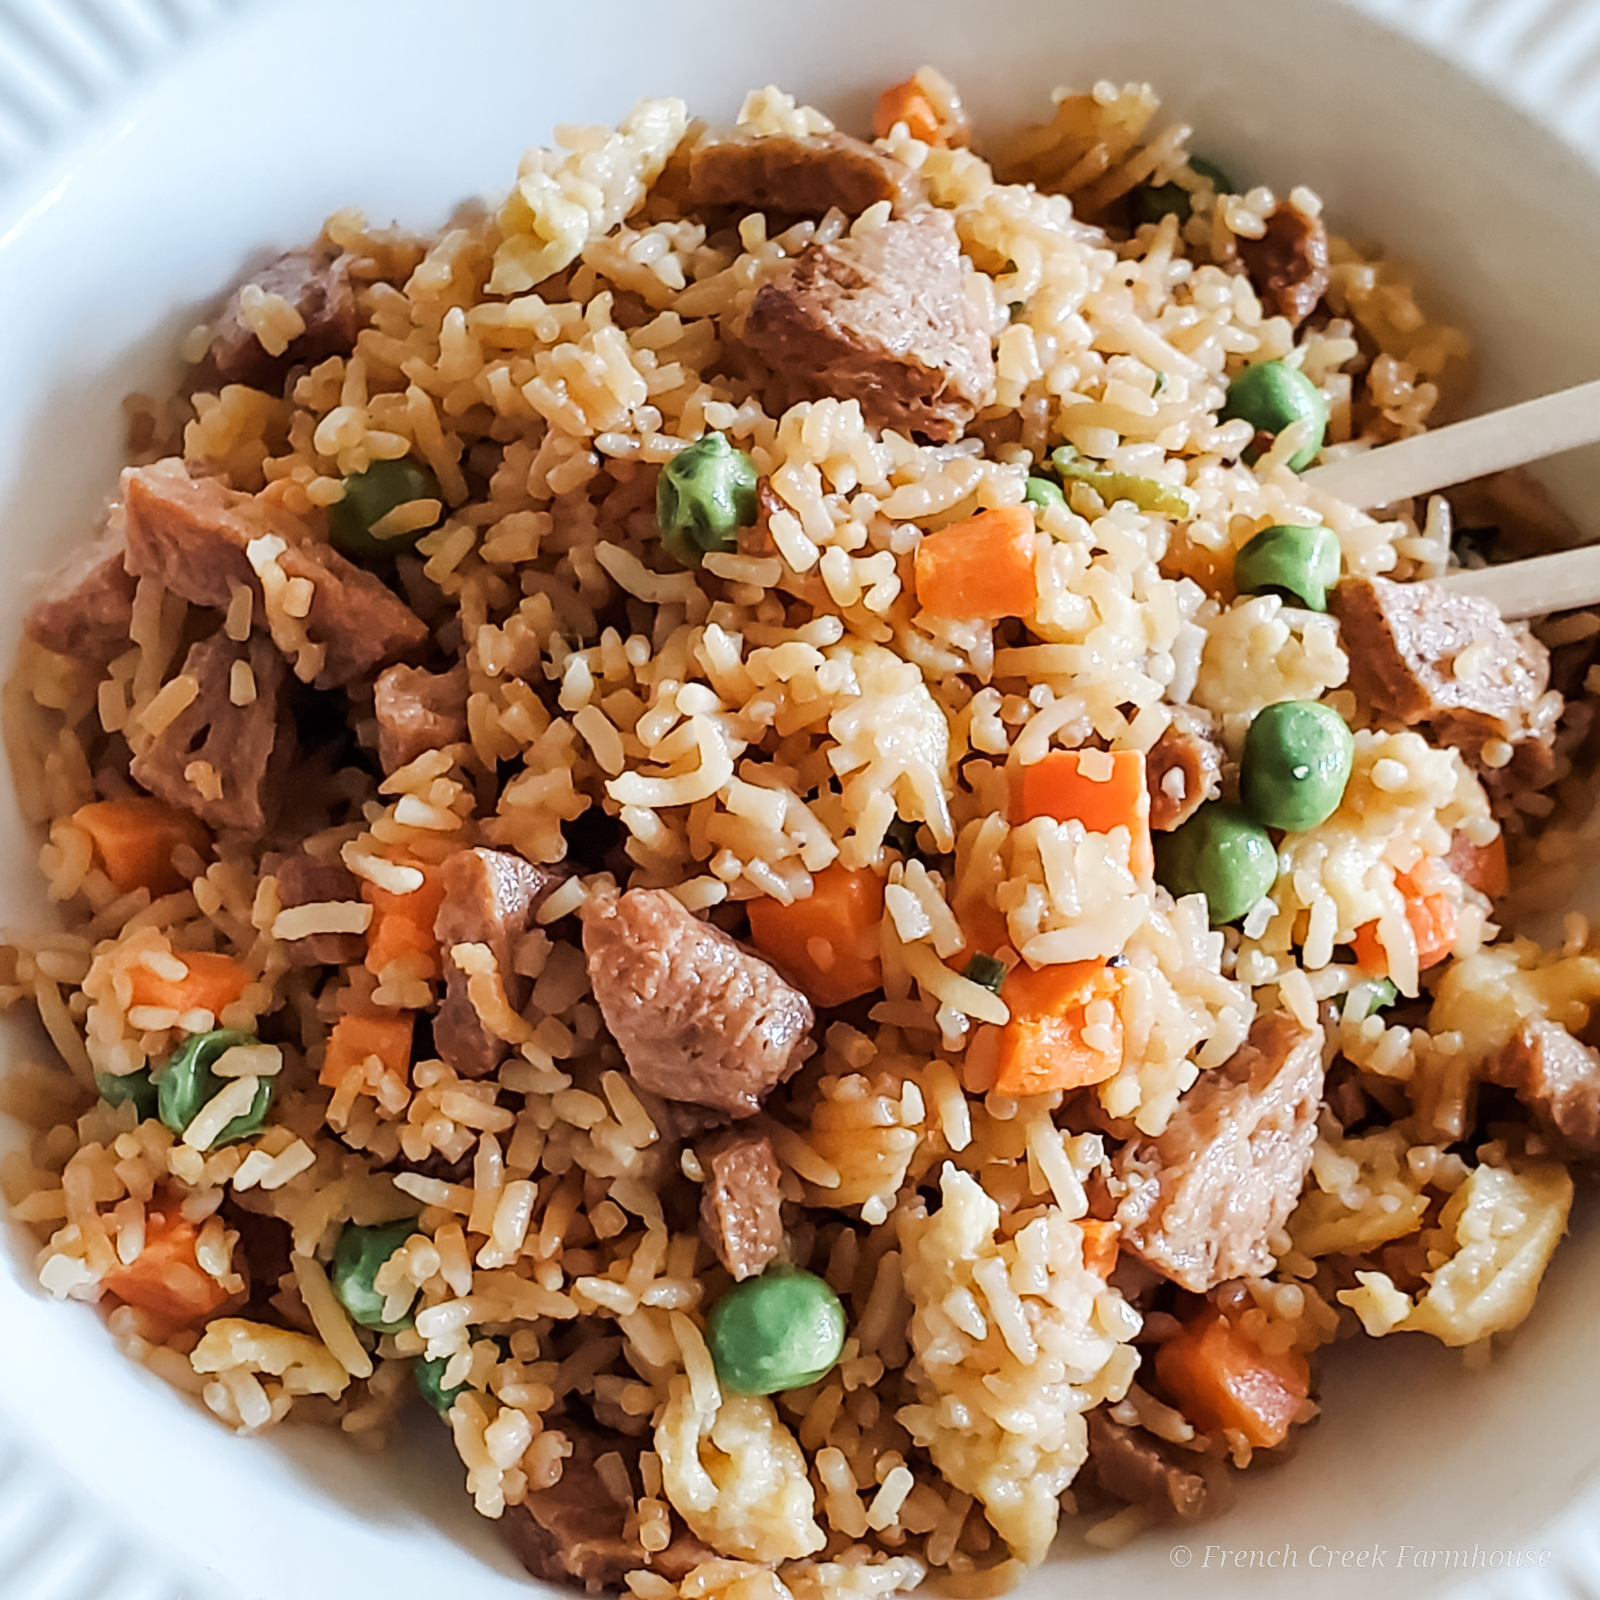 Delicious fried rice in only 20 minutes!